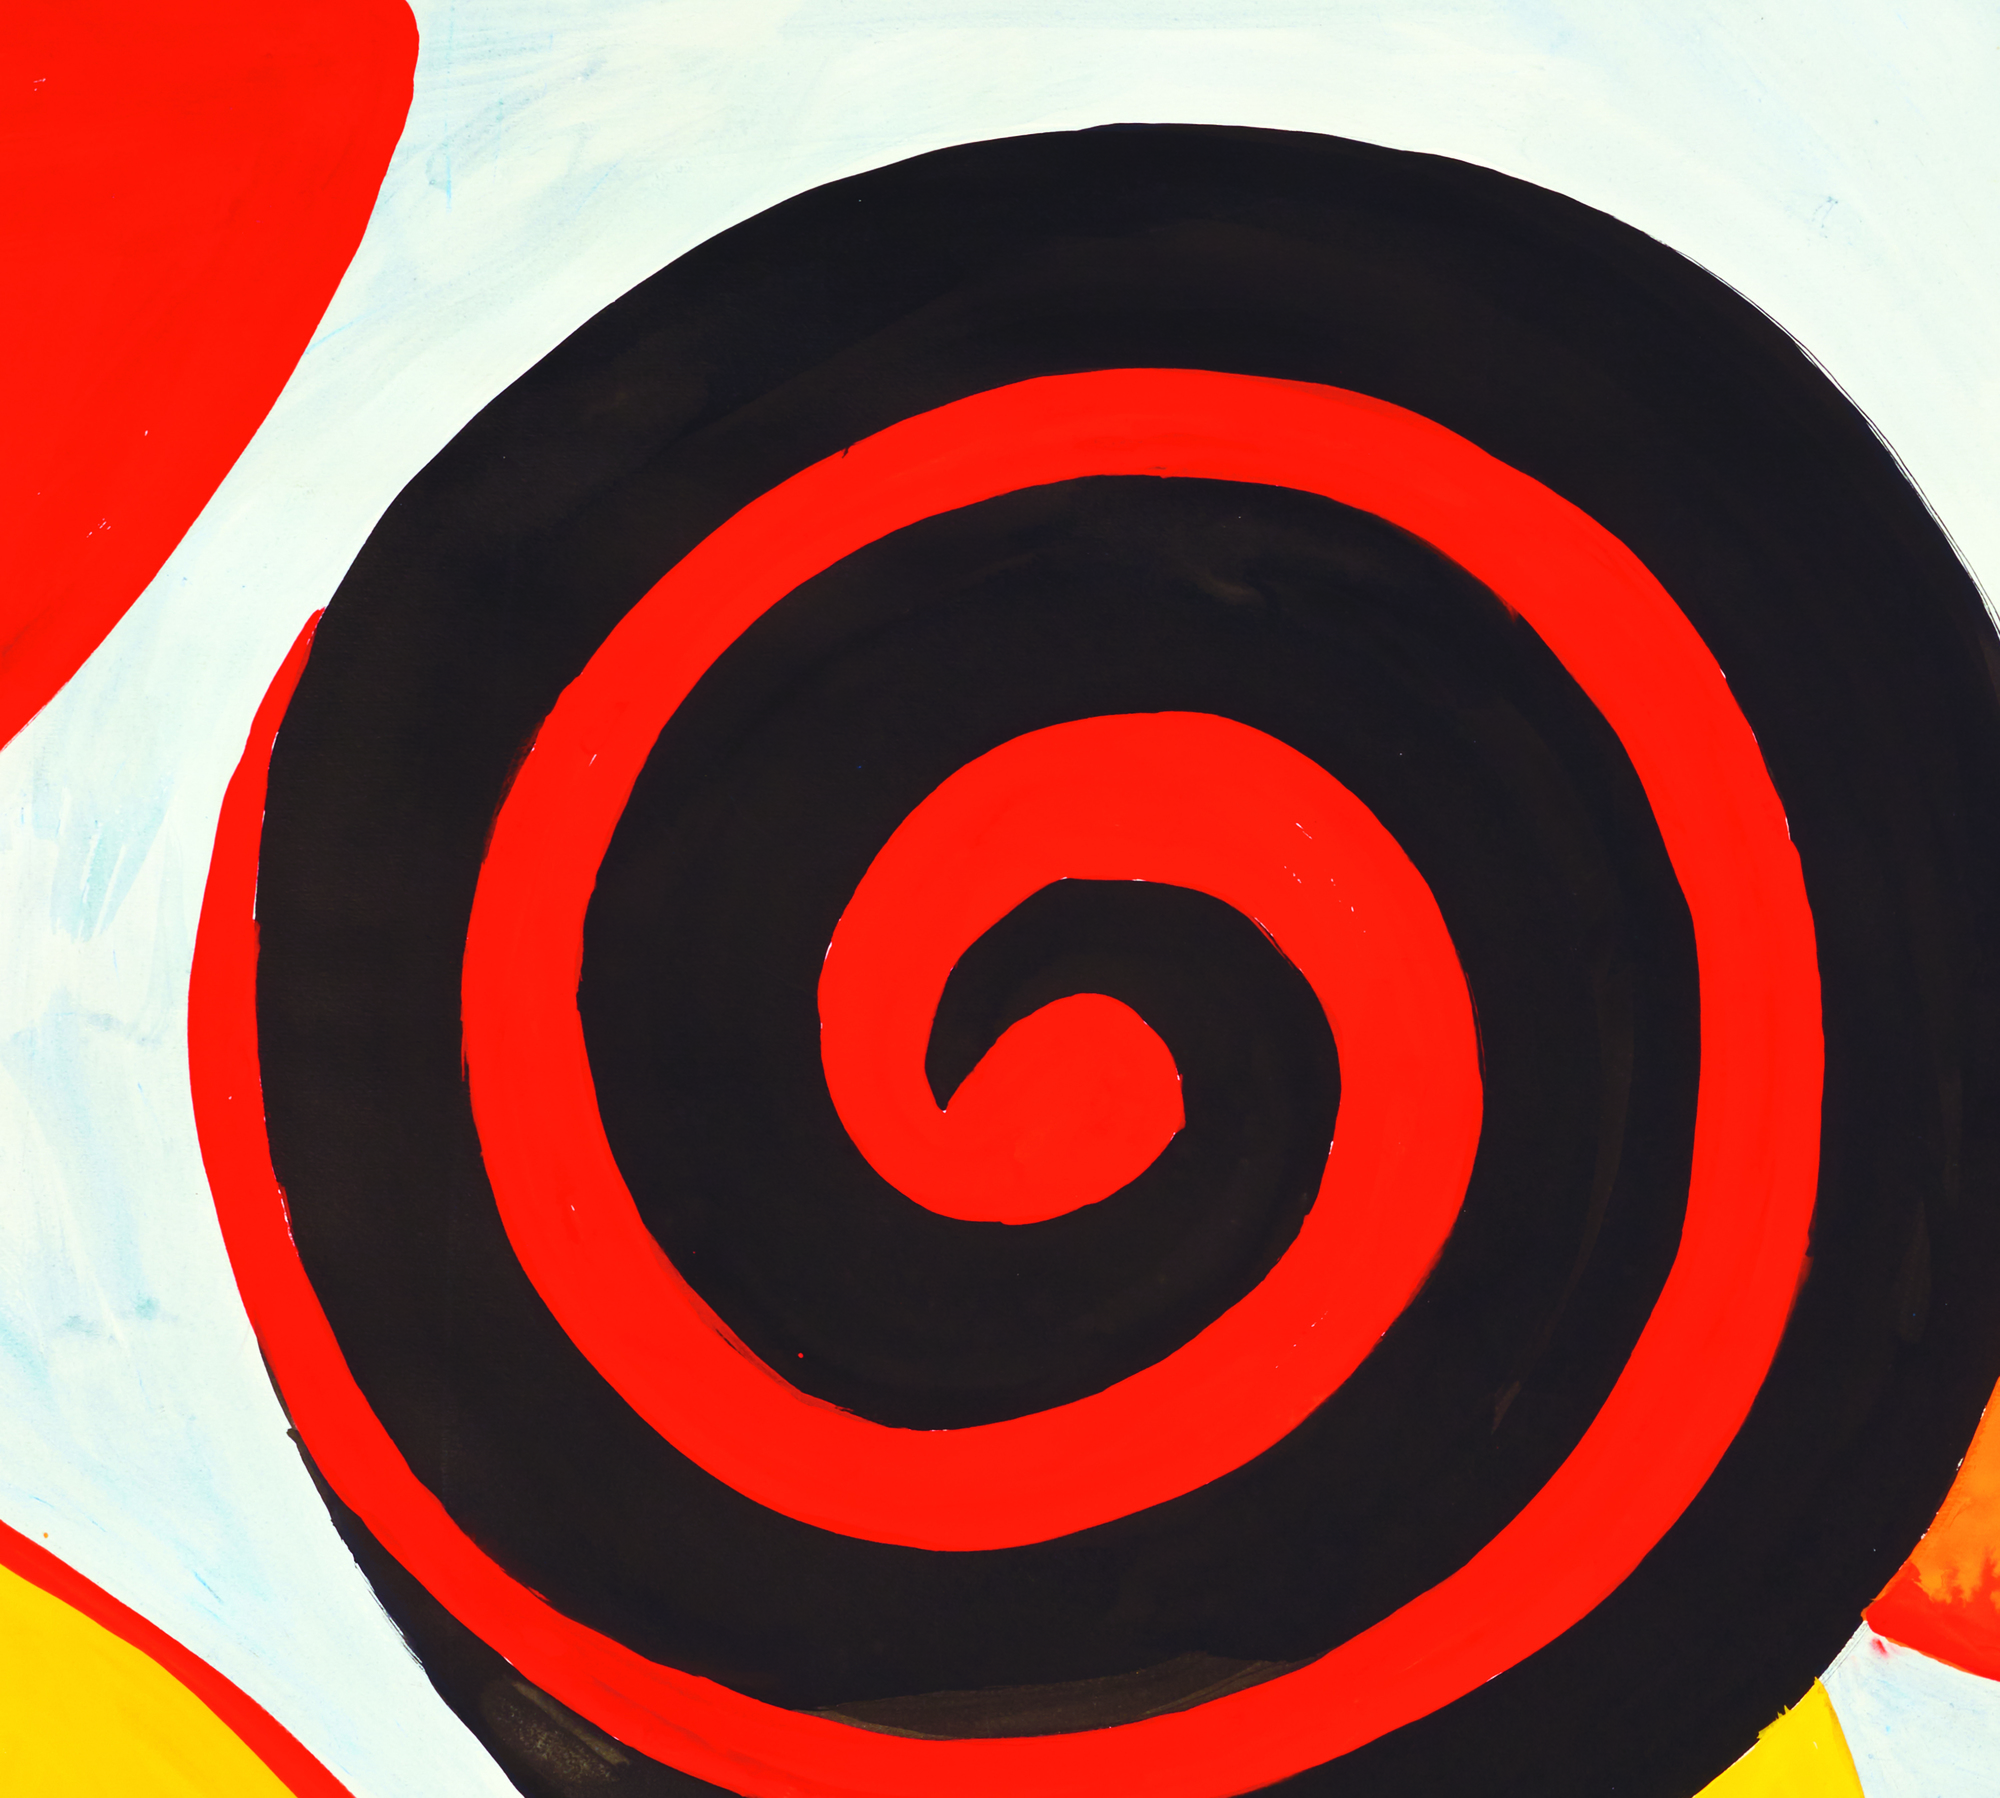 ALEXANDER CALDER - Red and Black Spiral - gouache and ink on paper - 29 1/2 x 43 1/4 in.